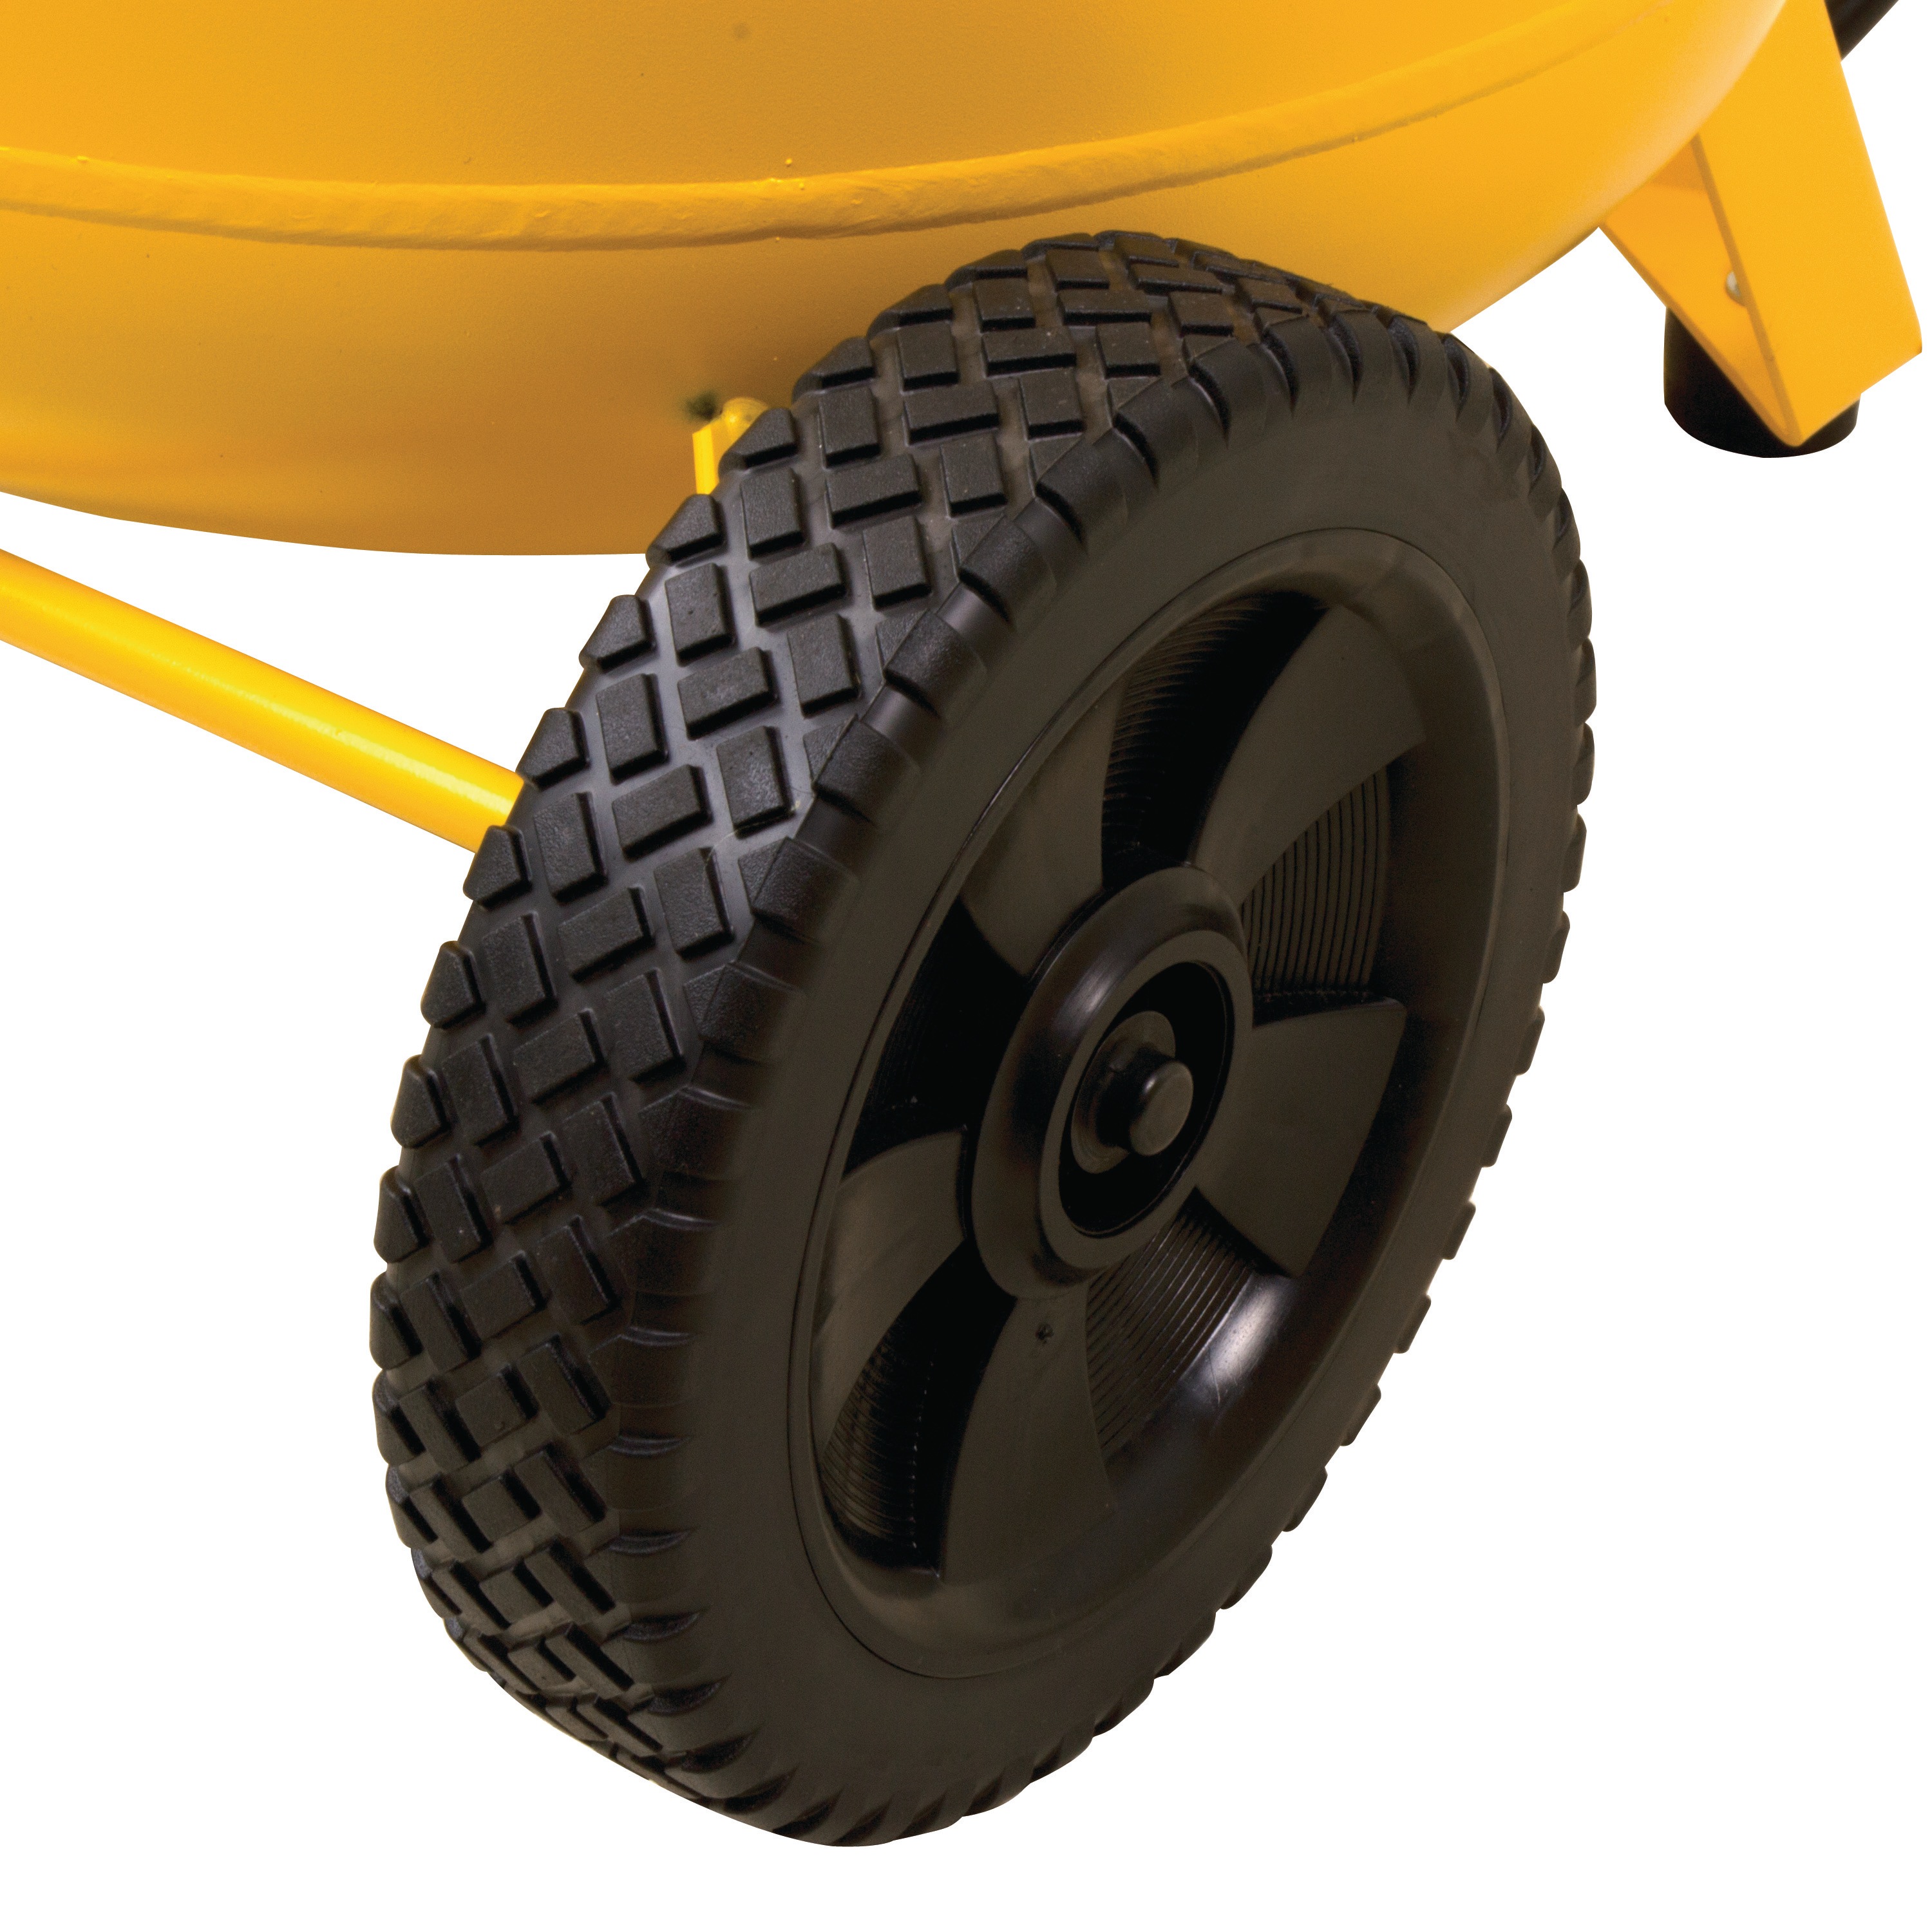 Pneumatic tire feature of 30 gallons Portable Electric Air Compressor.